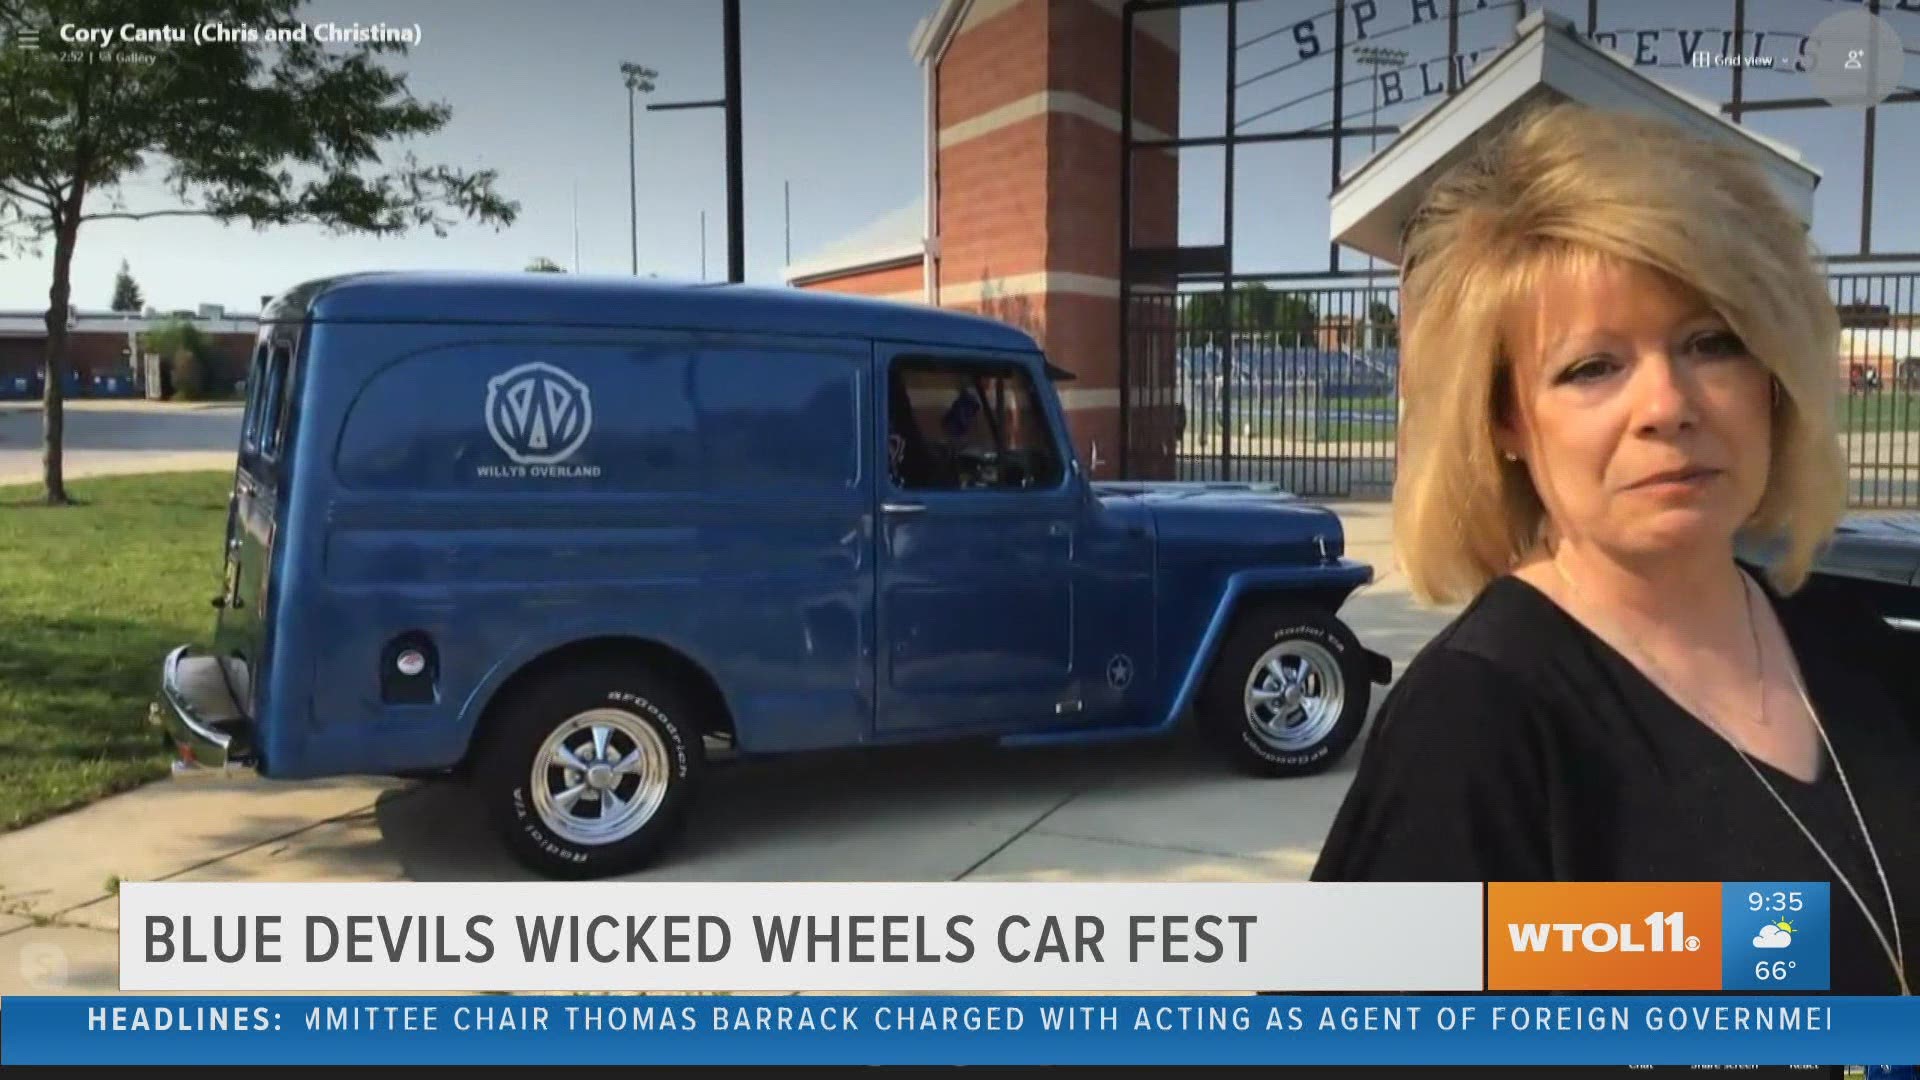 Aug. 4 is the Blue Devils Wicked Wheels Car Fest at Springfield High School!